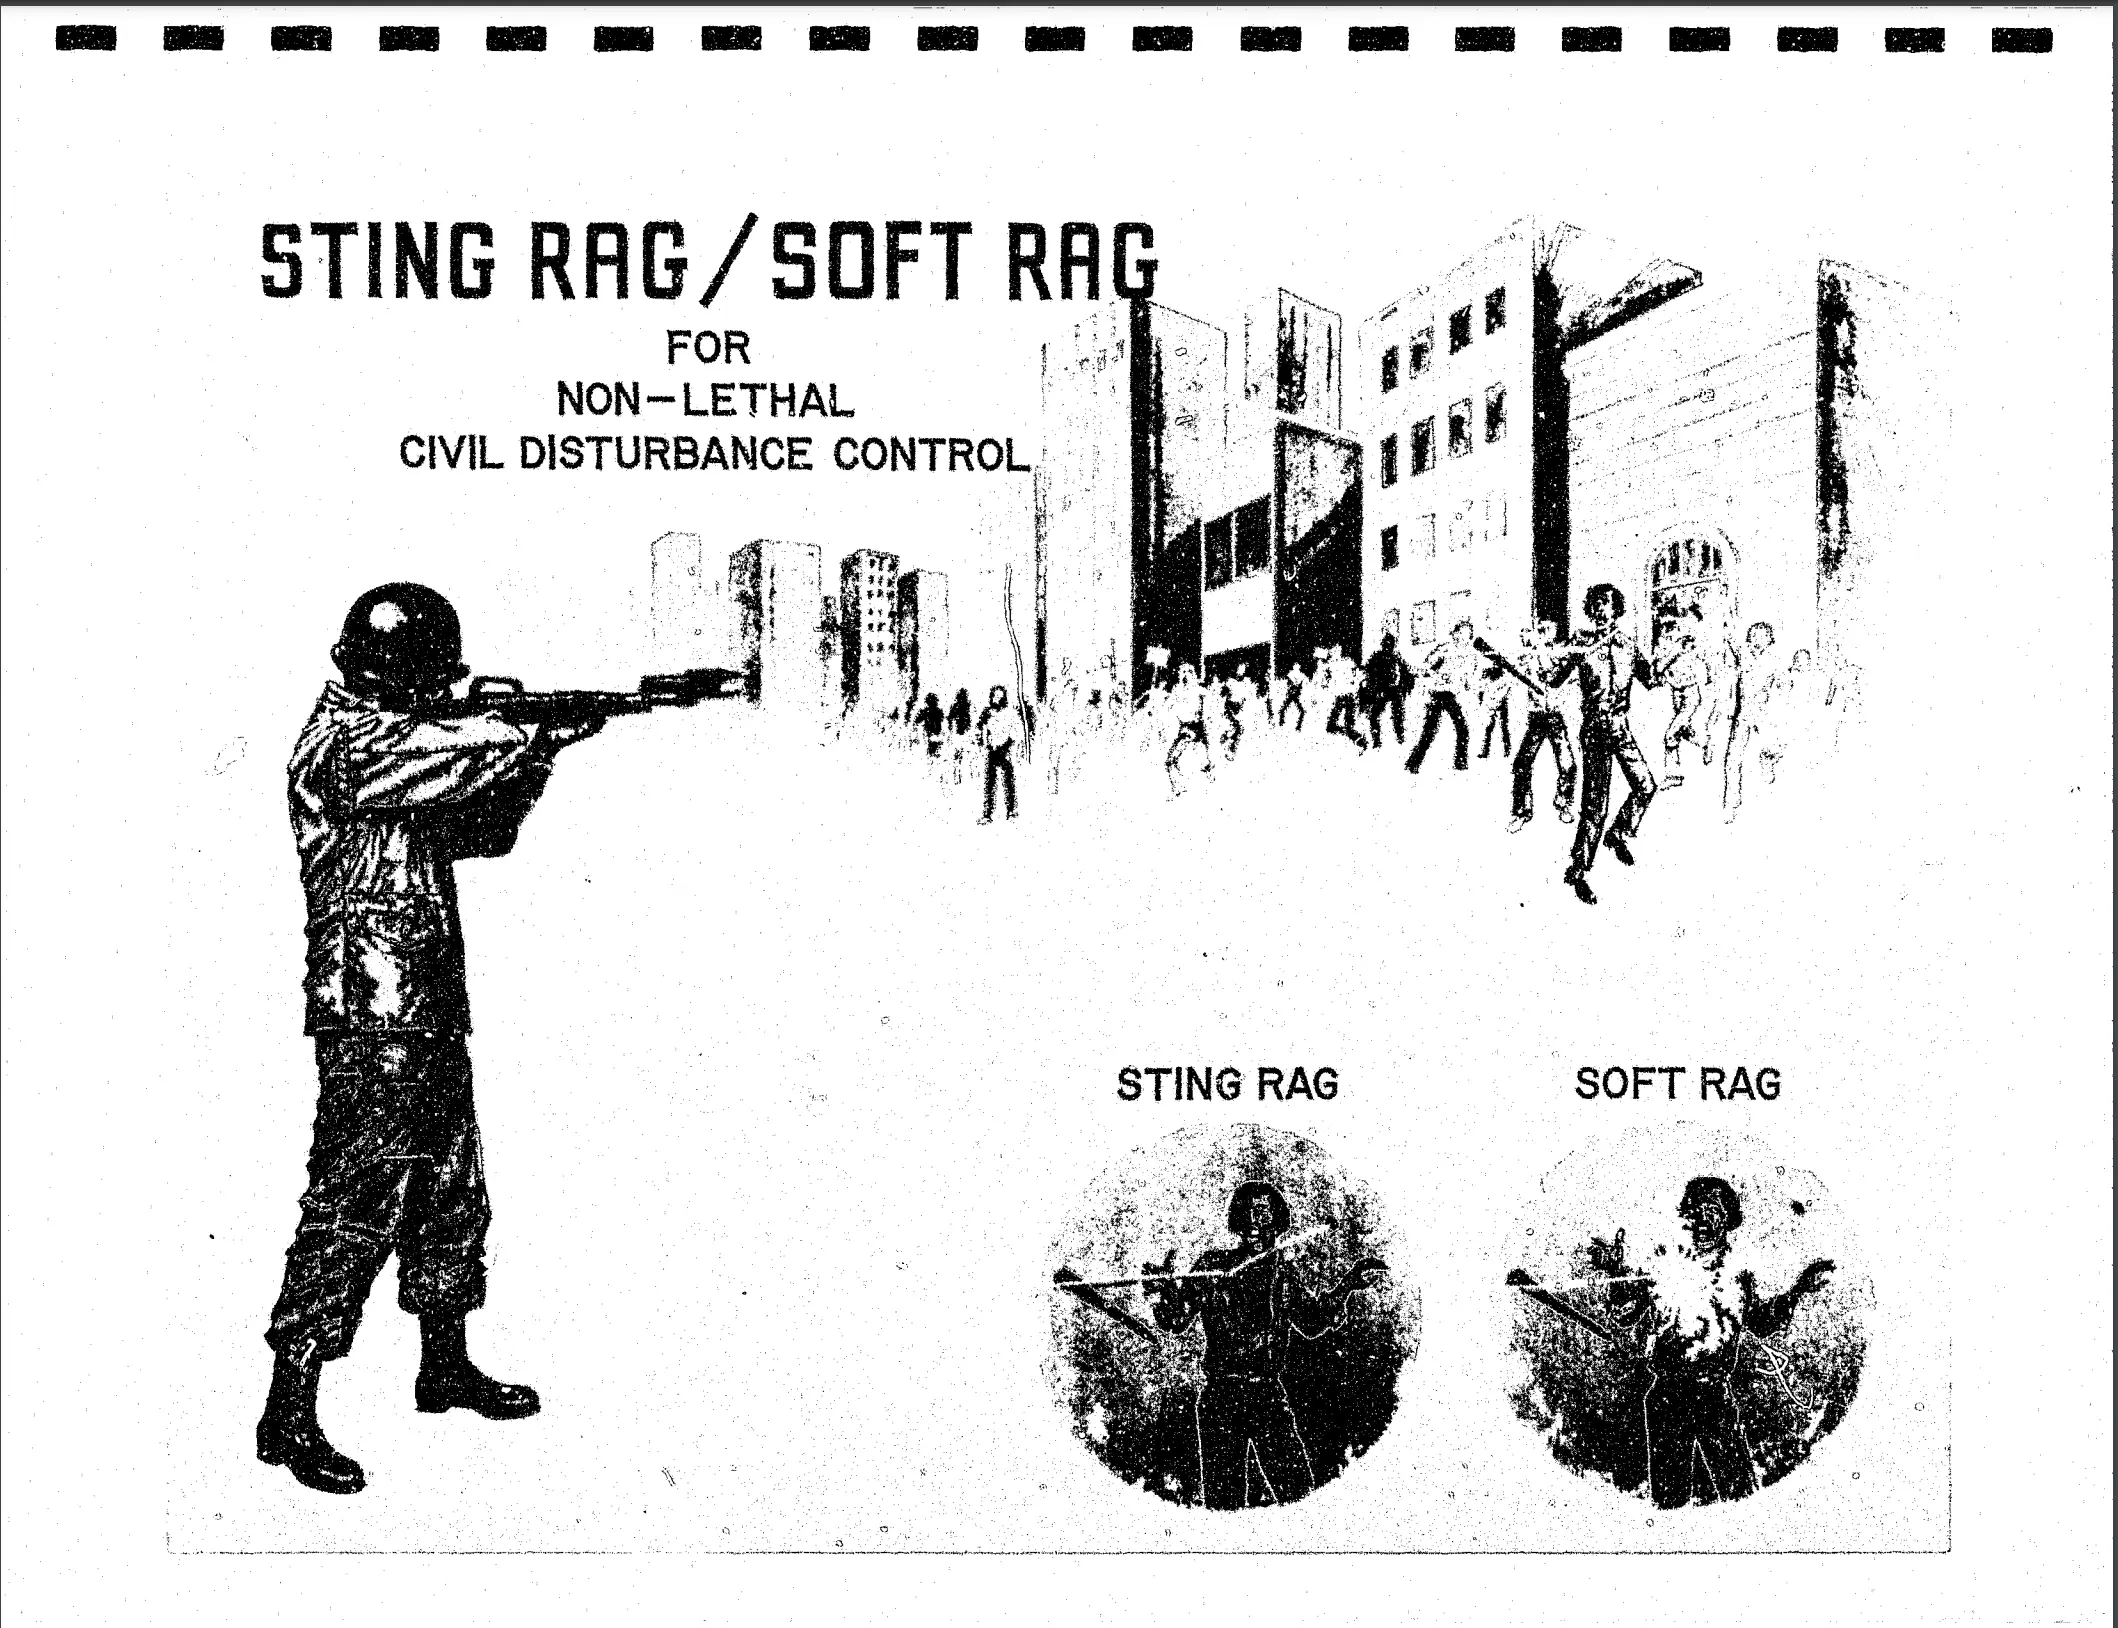 A page from the 1976 U.S. Army report titled "Riot Control Without Bloodshed."